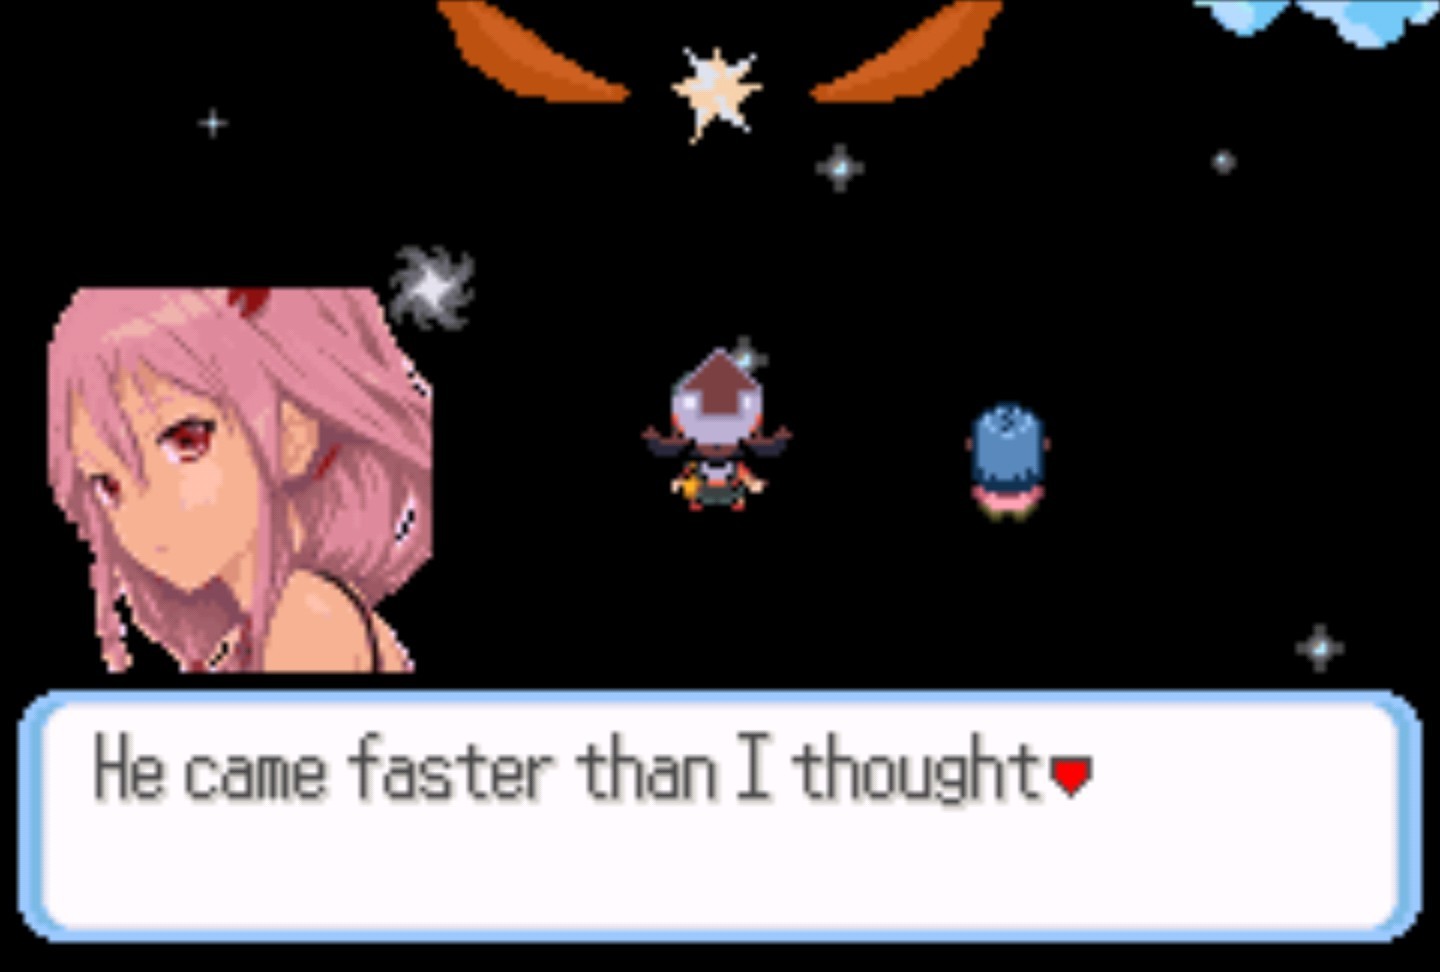 When it's your first time having sex (Game is Pokemon Darkrealm) - meme